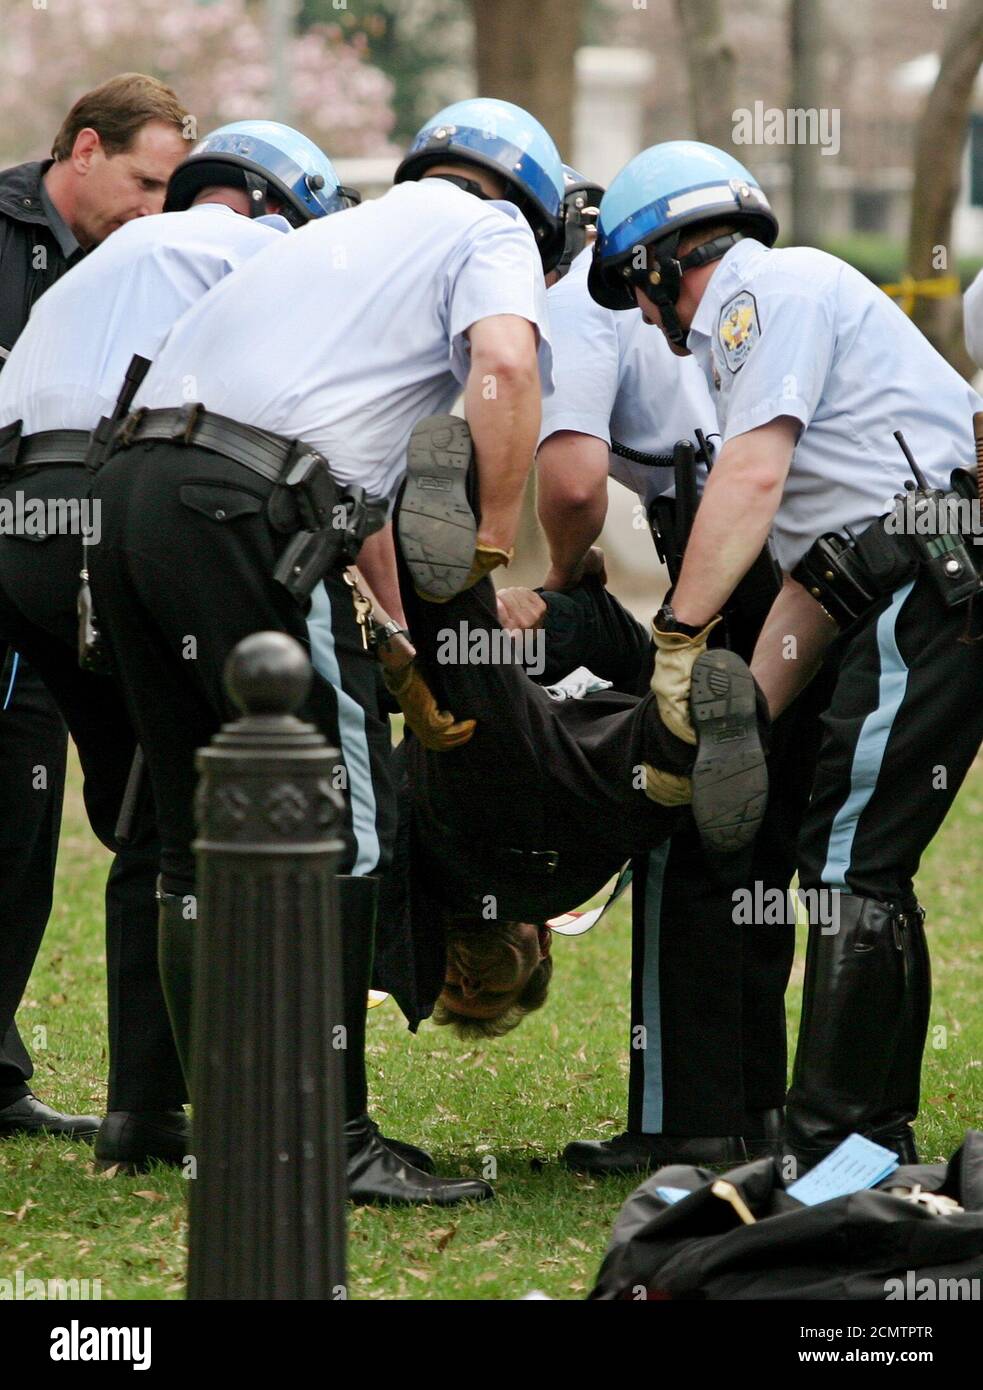 United States Park Police officers carry away an anti-war protester after arresting him for refusing to get up off the ground and leave Lafayette Park, across the street from the White House in Washington, March 26, 2003. Religious leaders and members of several peace groups came together for the non-violent civil disobedience action to protest the war in Iraq. REUTERS/Jim Bourg  JRB/GN Stock Photo